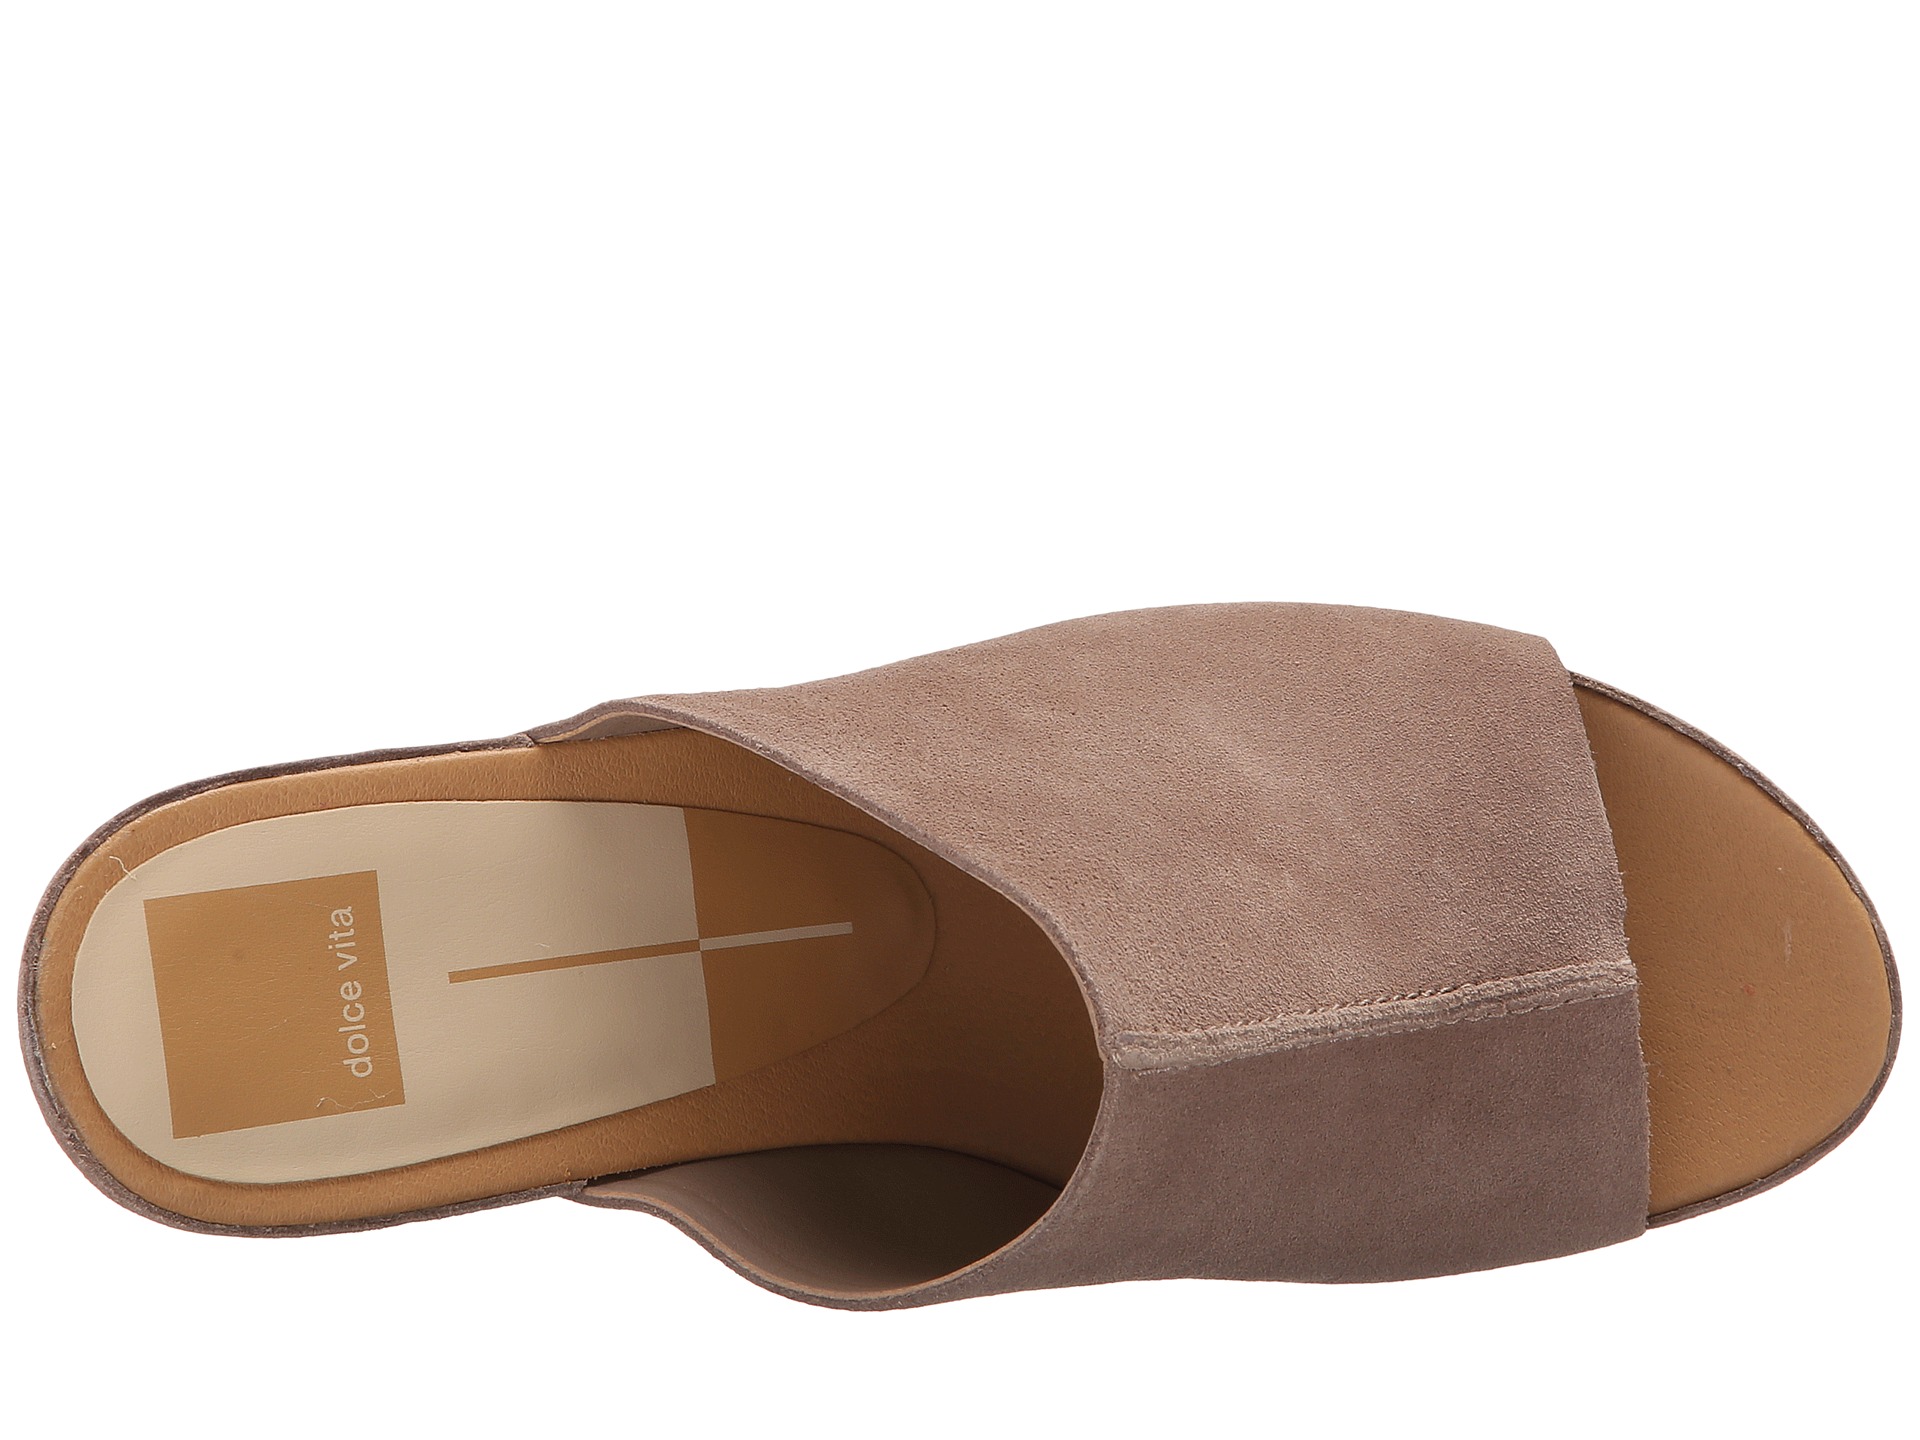 Dolce Vita Ross Persimmon Suede - Zappos.com Free Shipping BOTH Ways